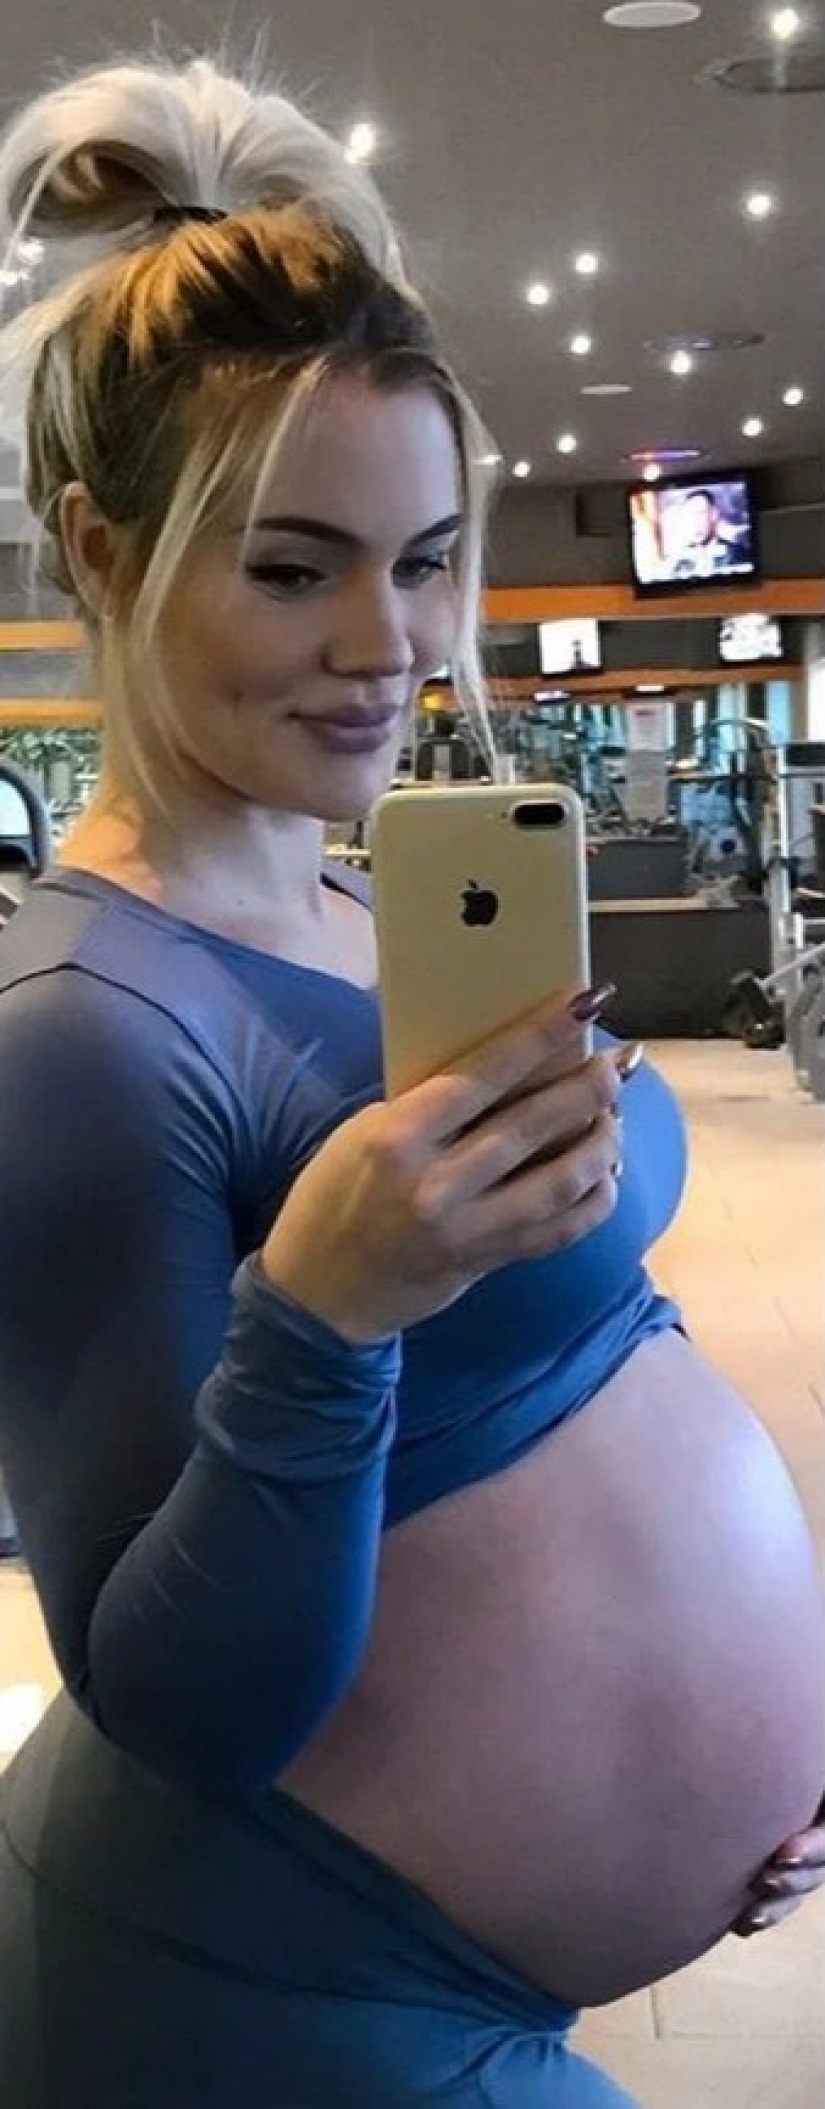 The female bodybuilder trained in a hall the whole pregnancy and even squatted during contractions